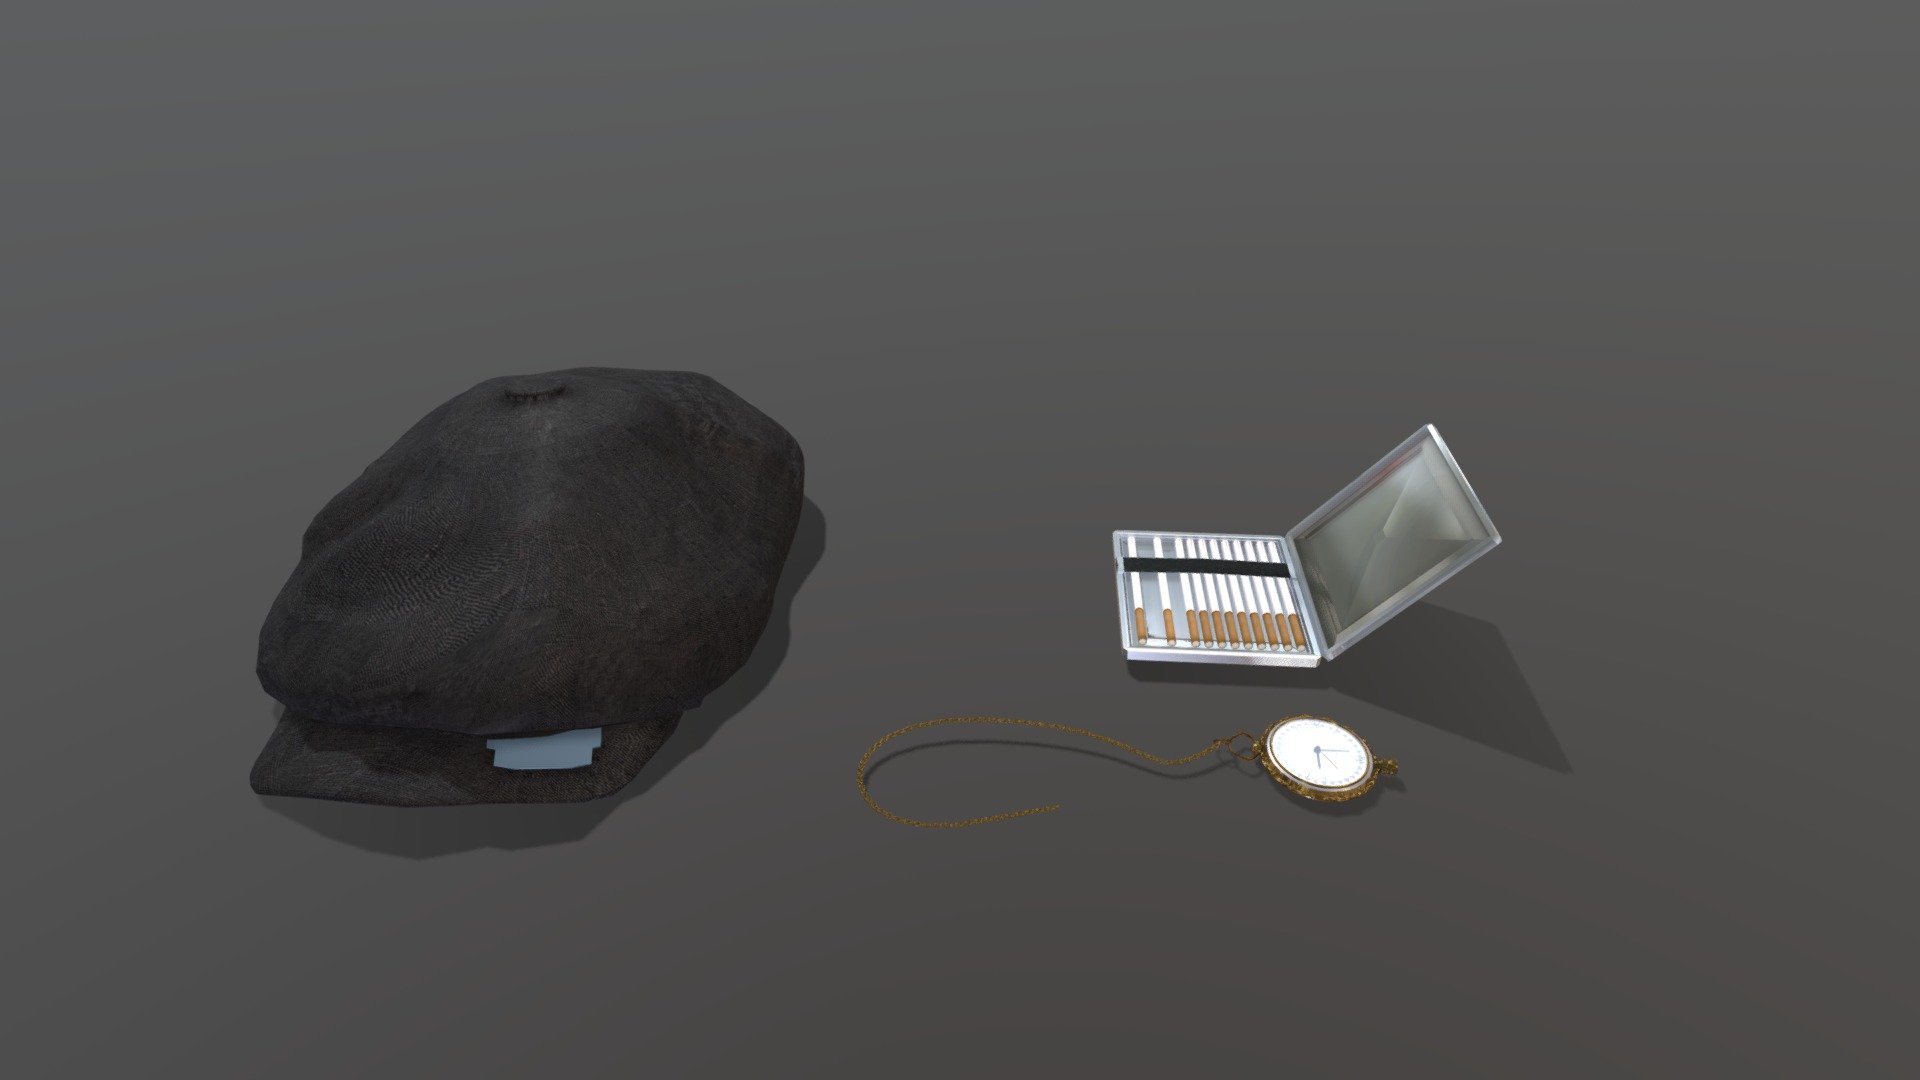 includes:
Newspaper Boy hat
cigarette Box
pocket watch 

opinion and sugestions welcome in coments :) - items from Peaky Blinders series - 3D model by CHadModeling 3d model